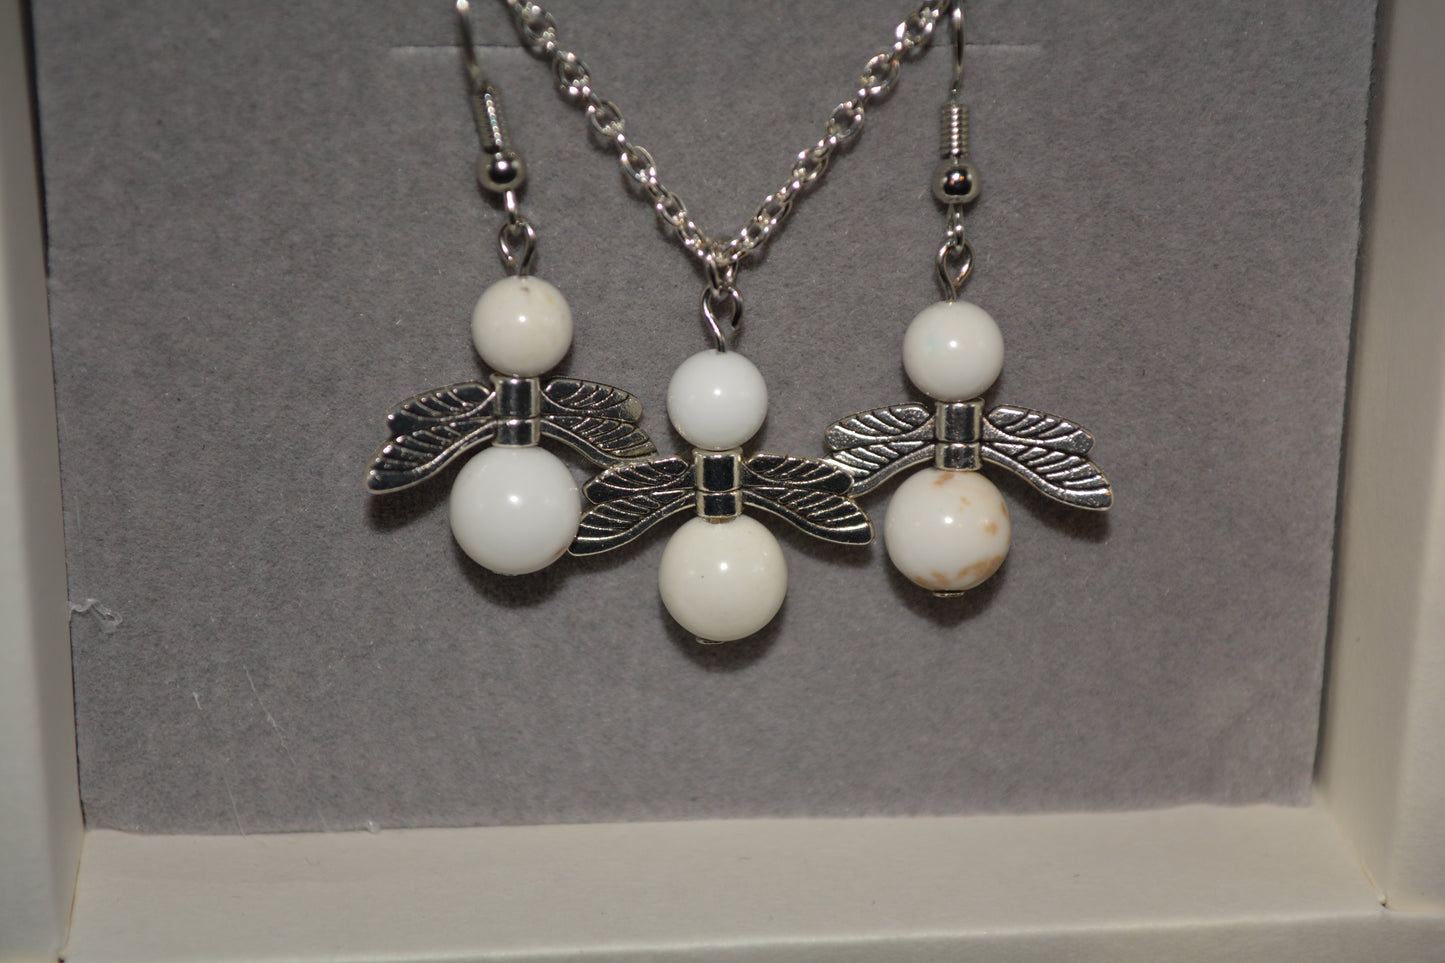 Angel Mystery Gift Set - White Turquoise